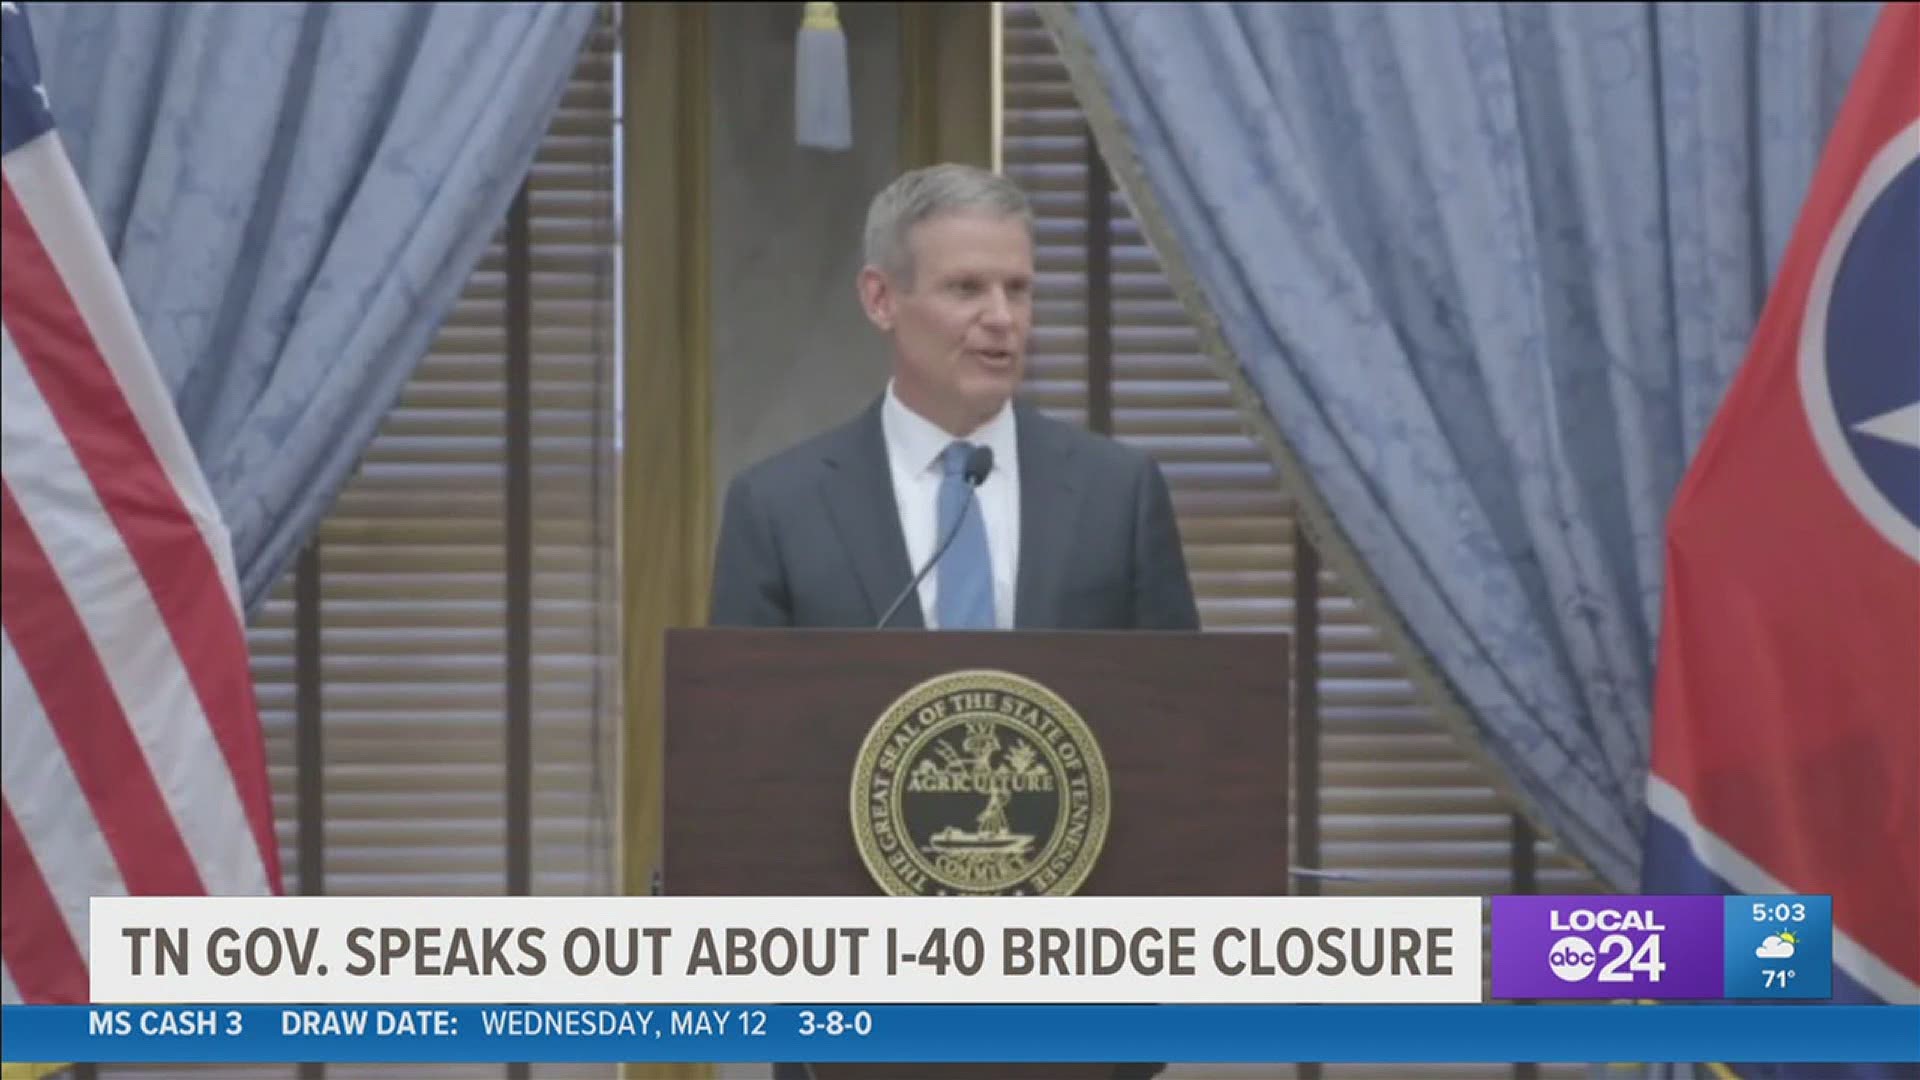 Tennessee and Arkansas's governors, as well as Mid-South lawmakers and Memphis' mayor, are reacting to the shutdown of the bridge and what it means for the area.